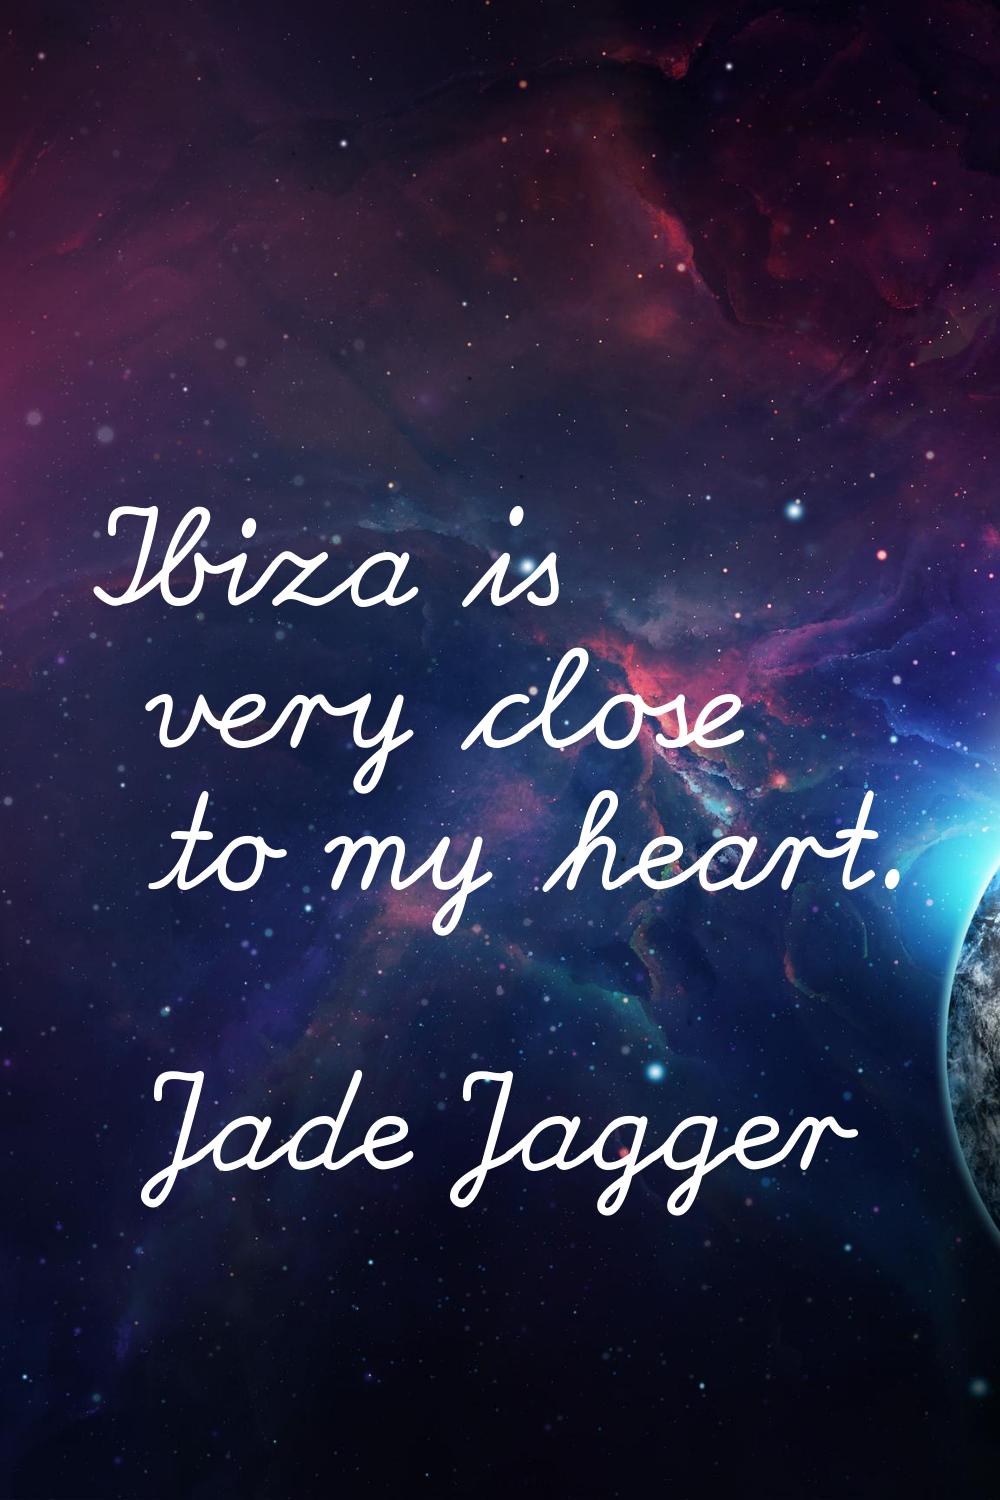 Ibiza is very close to my heart.